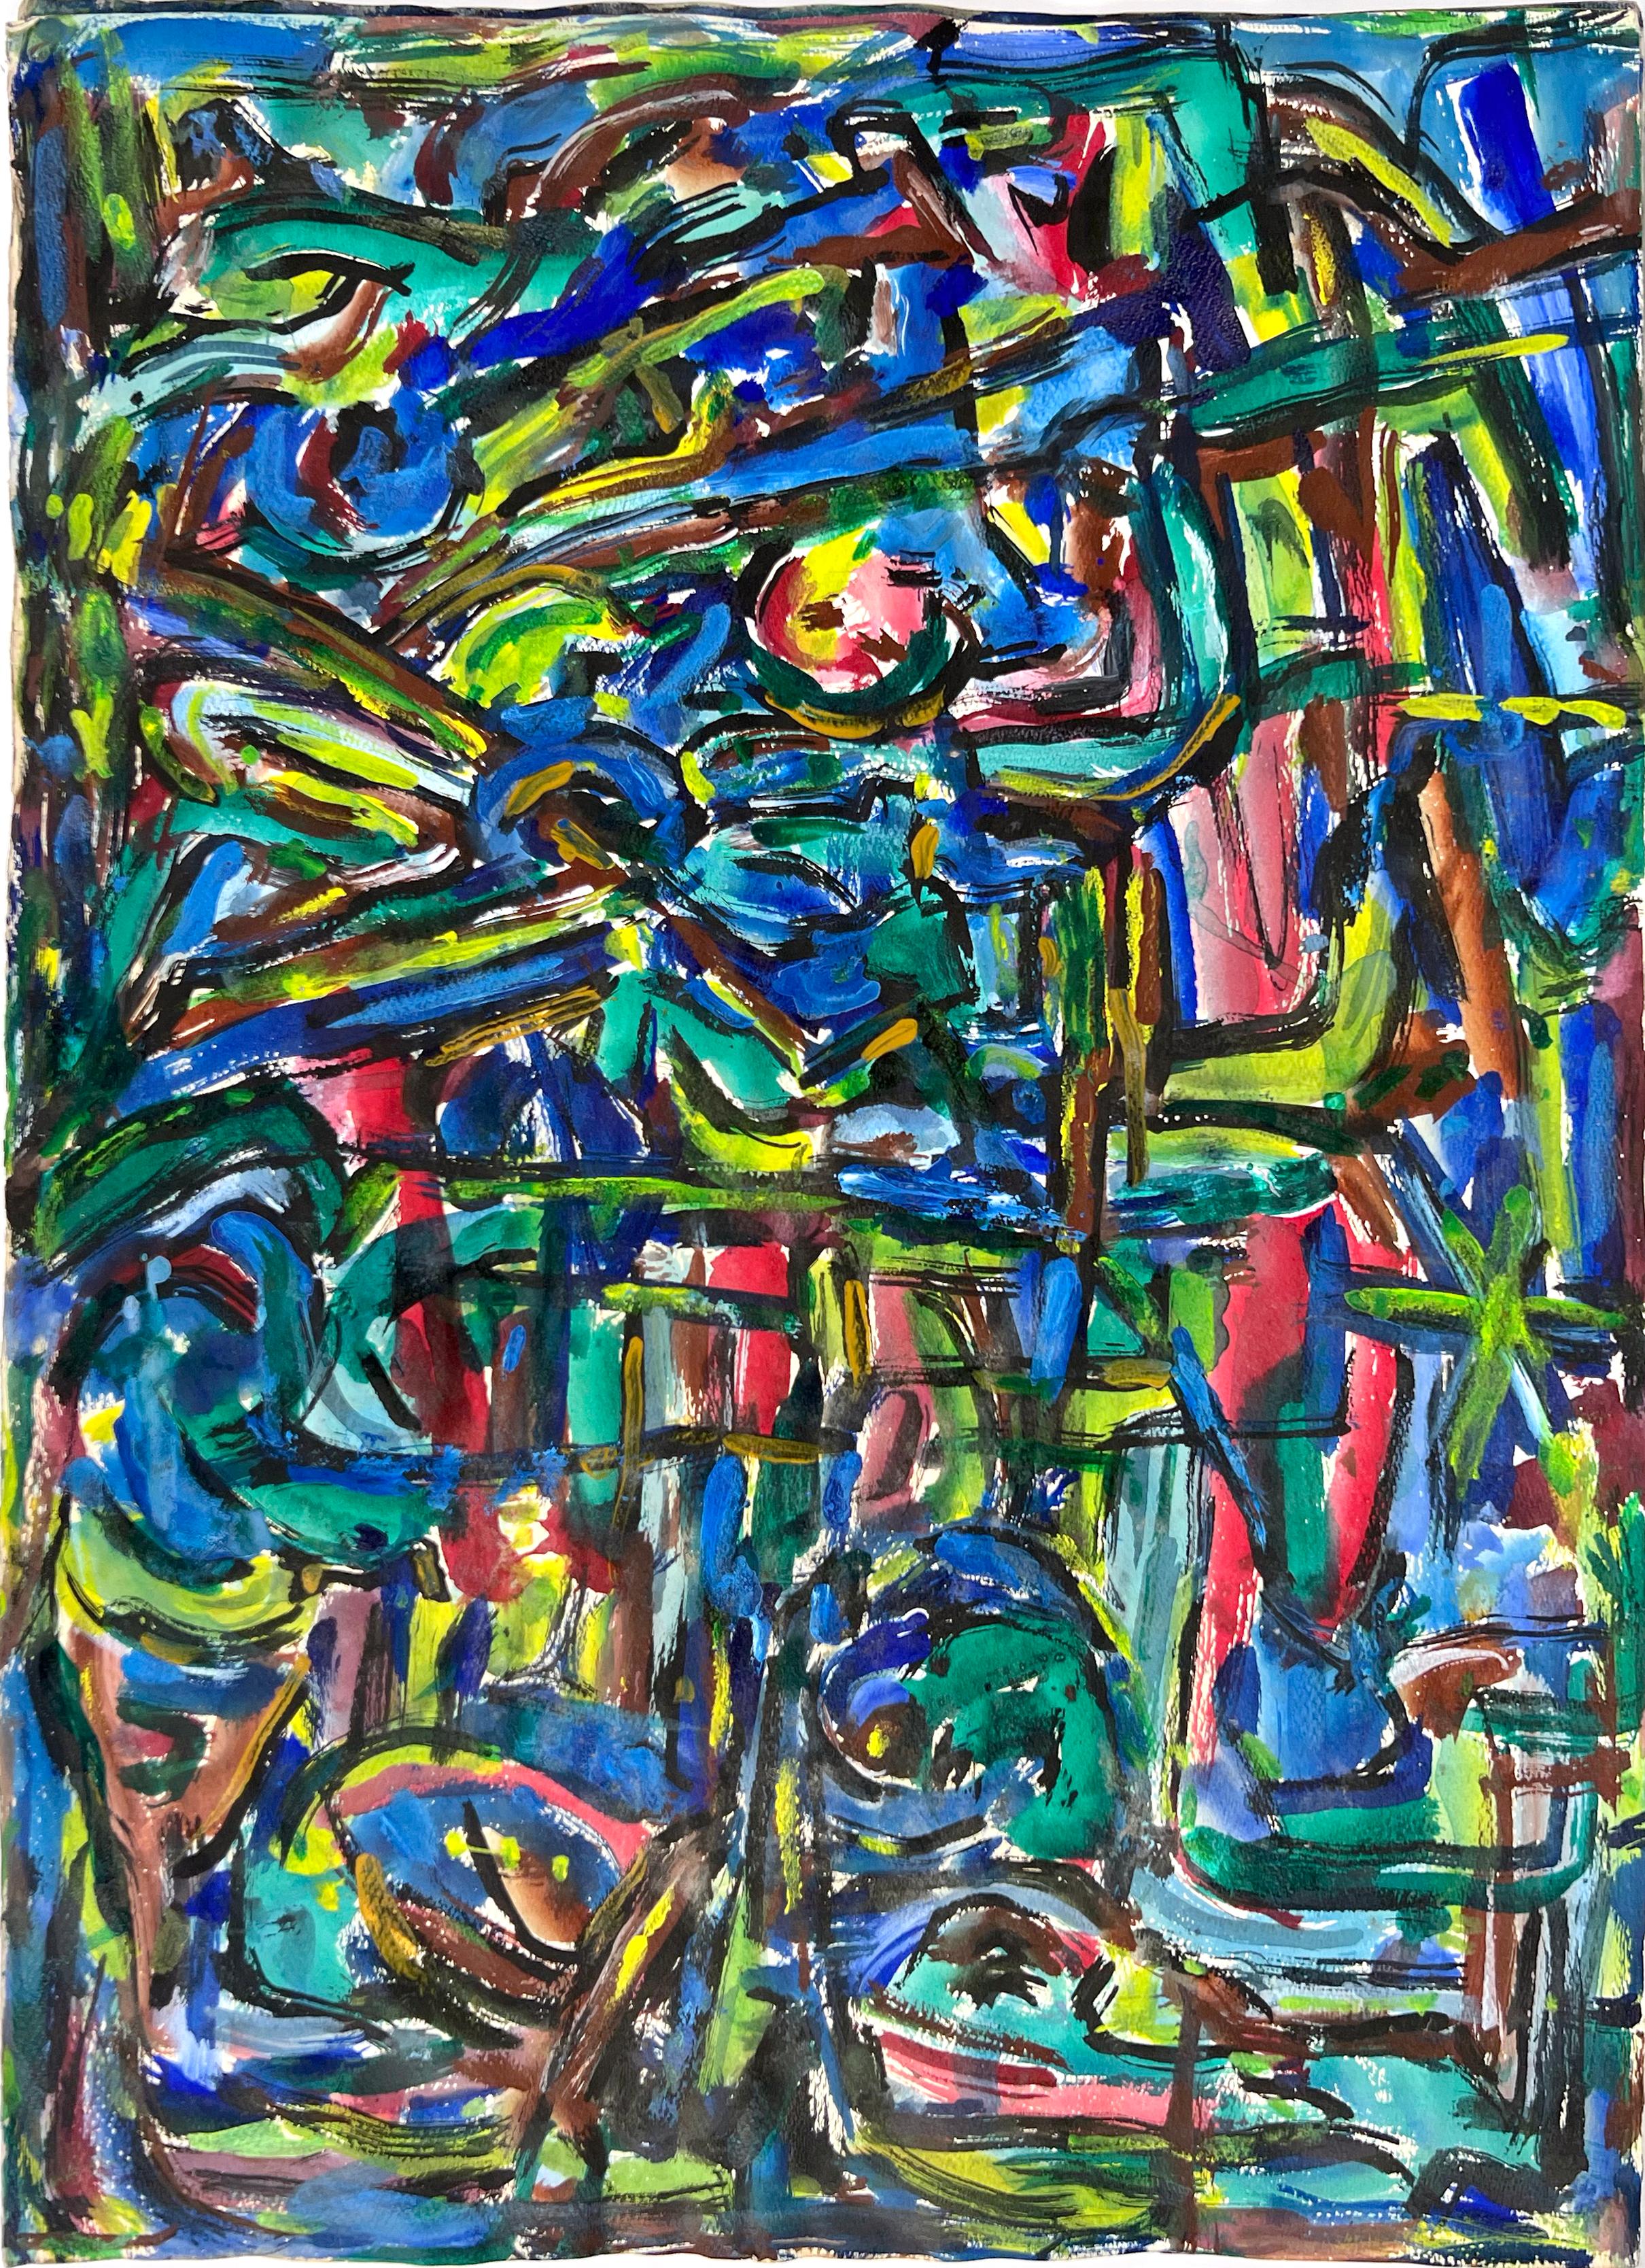 Abstract Expressionist Bay Area Fauvist Oil on Paper Honora Berg Berkeley 1959
San Francisco Bay area abstract expressionist painting by Honora Berg (American, 1897-1985).A brilliant fauvist example of the bold slashes of colors Honora Berg creates.